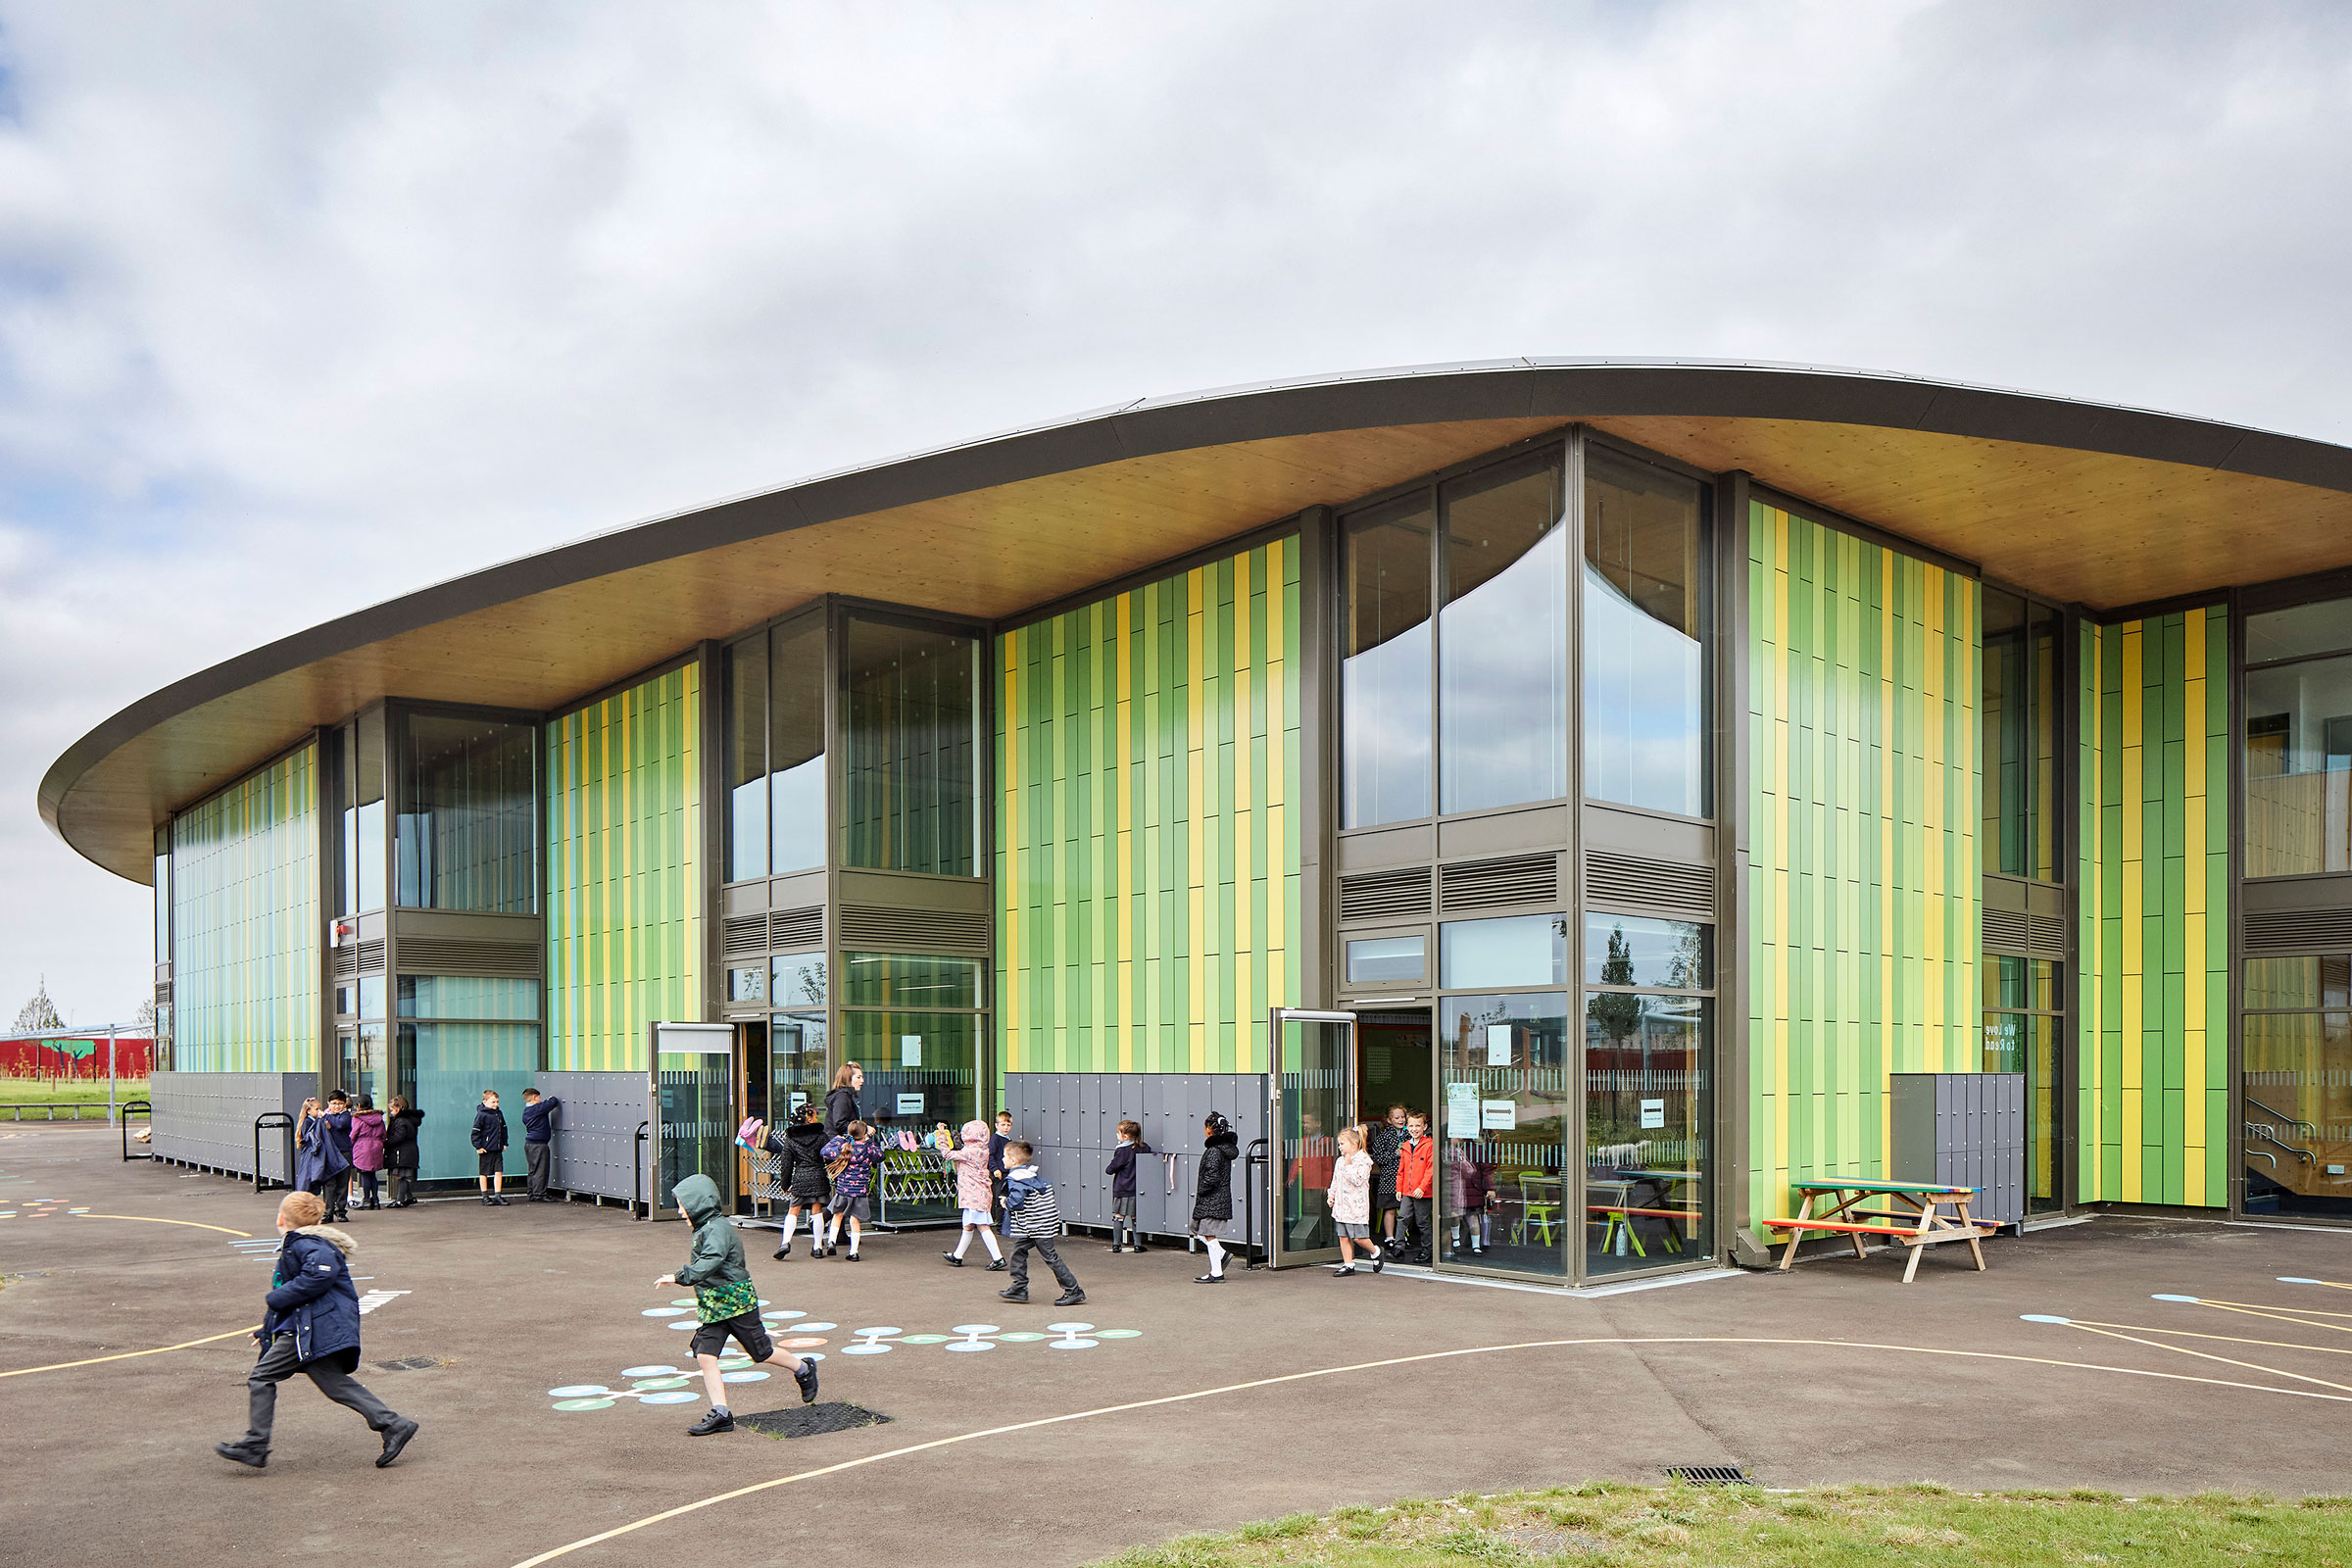 Wintringham Primary Academy Blends Indoor and Outdoor Learning